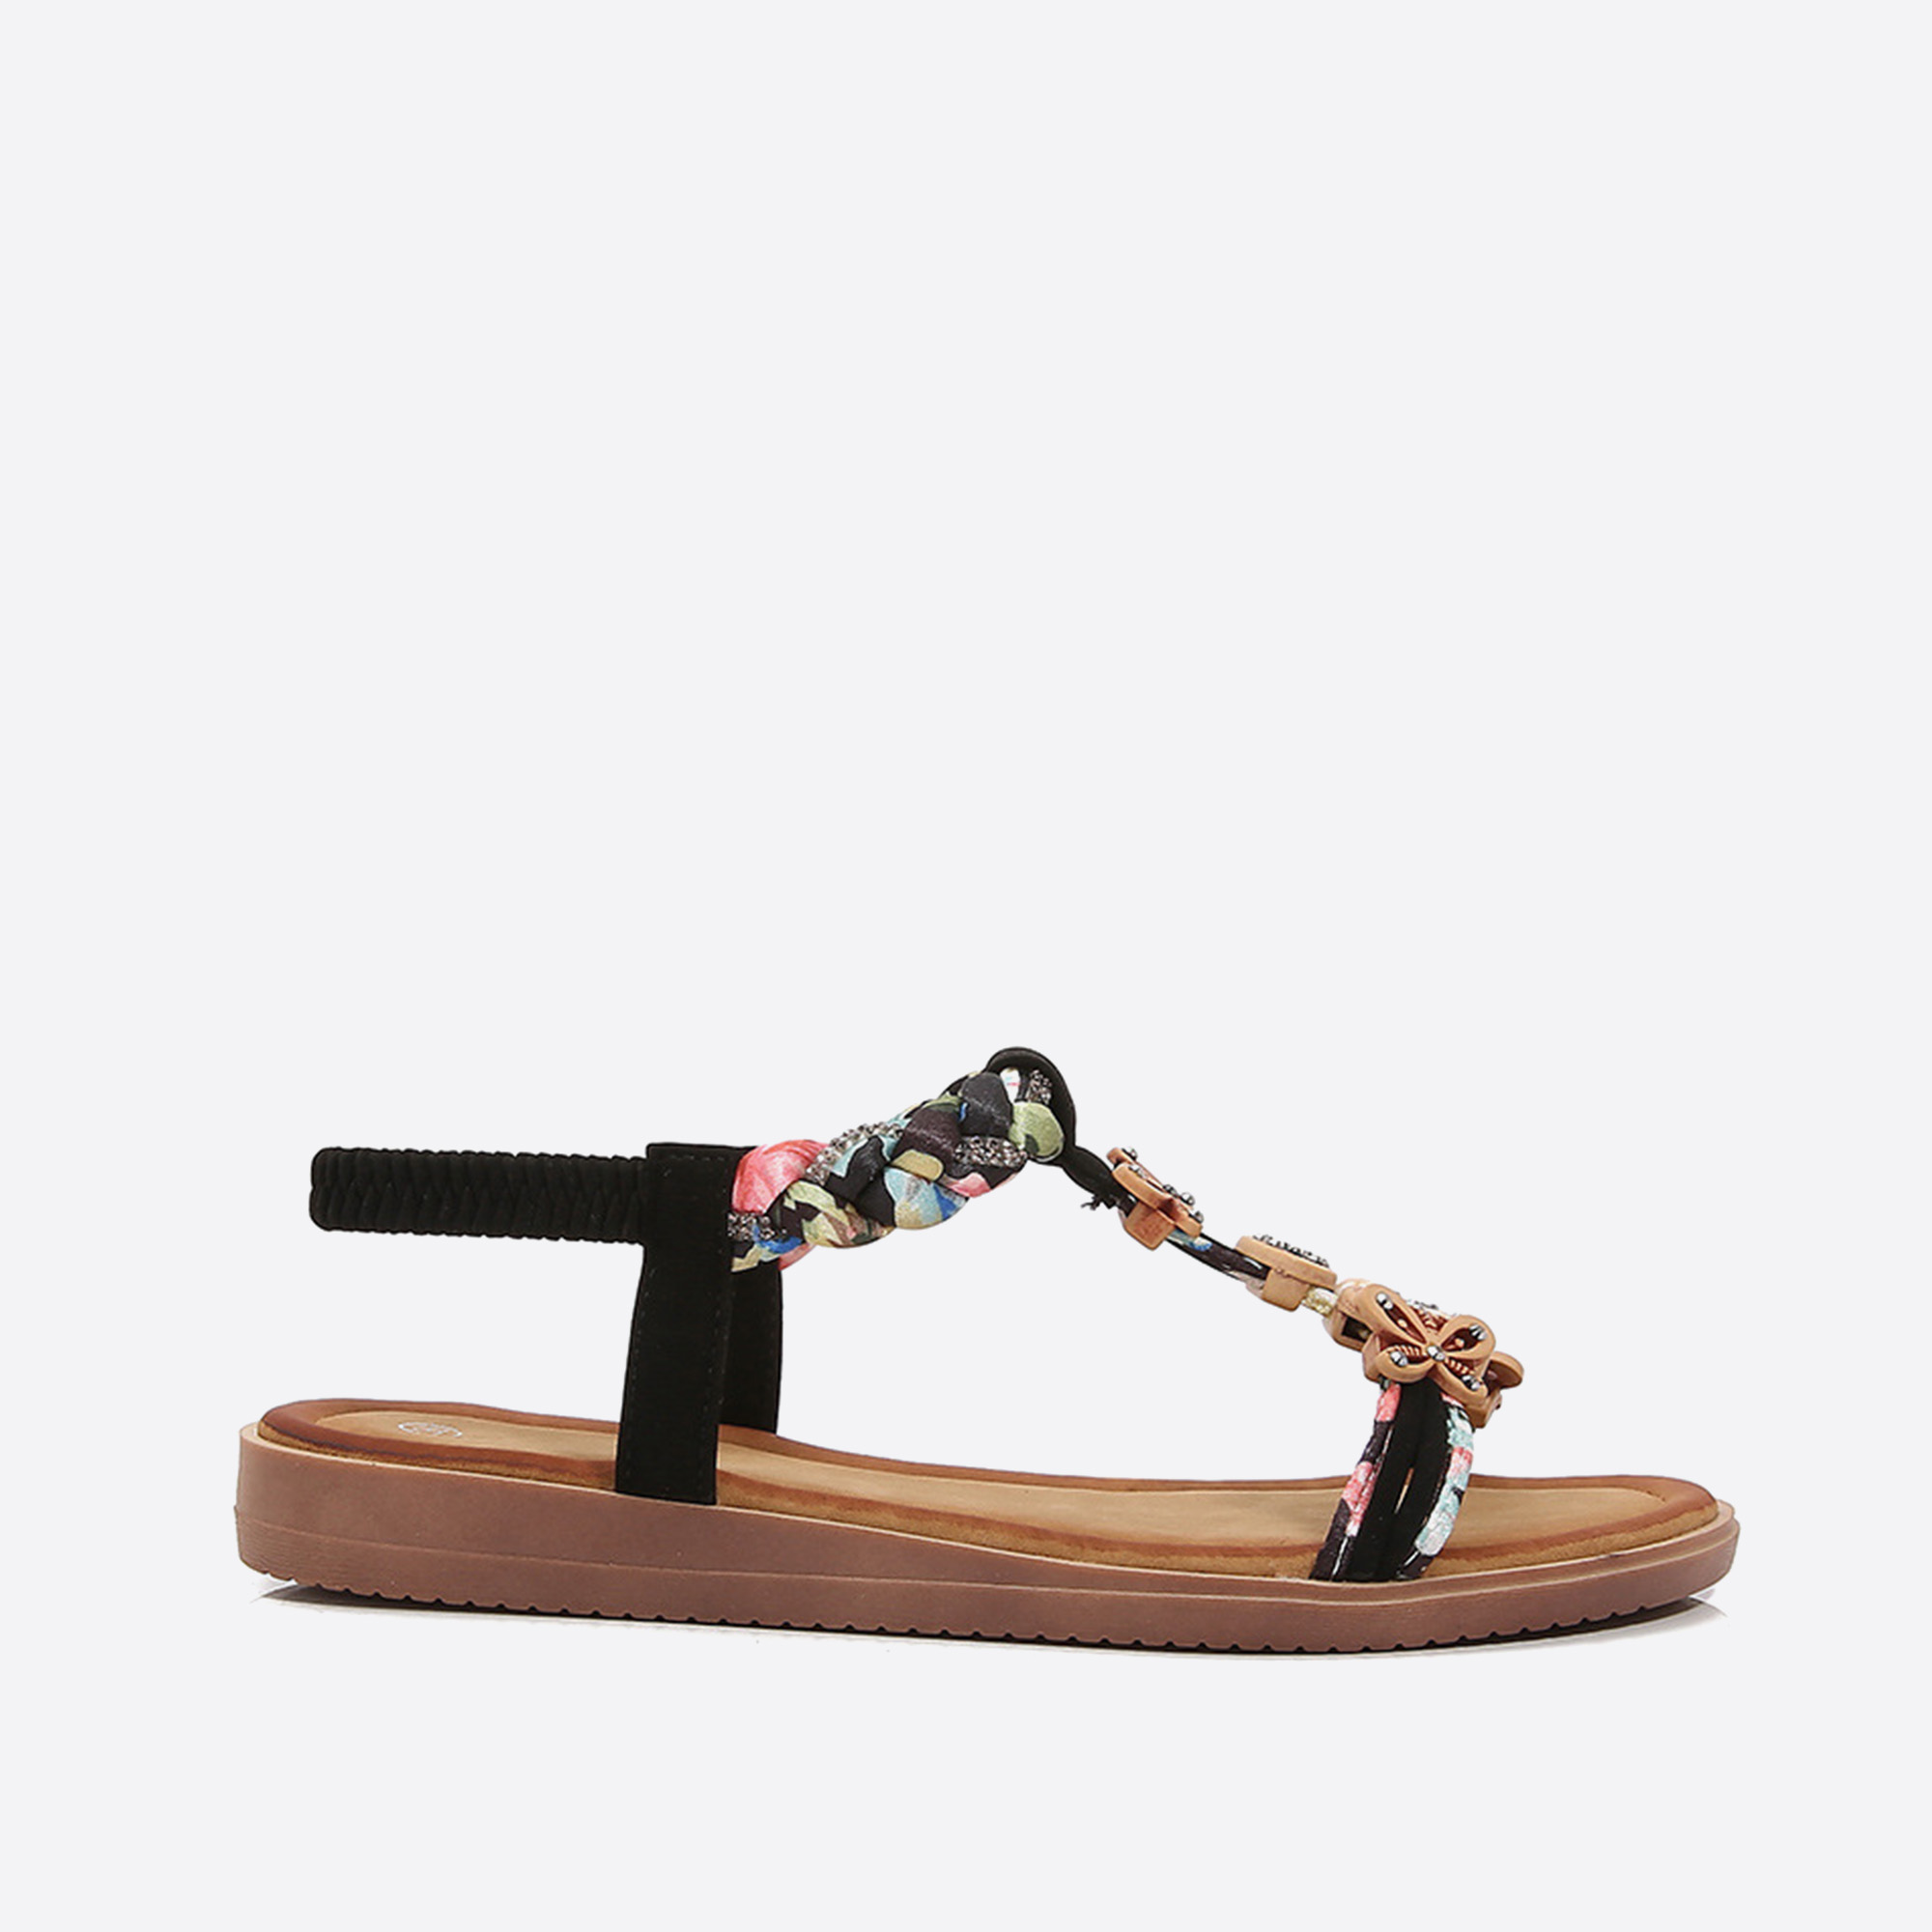 Crystal Vacation & Party Flat Sandals